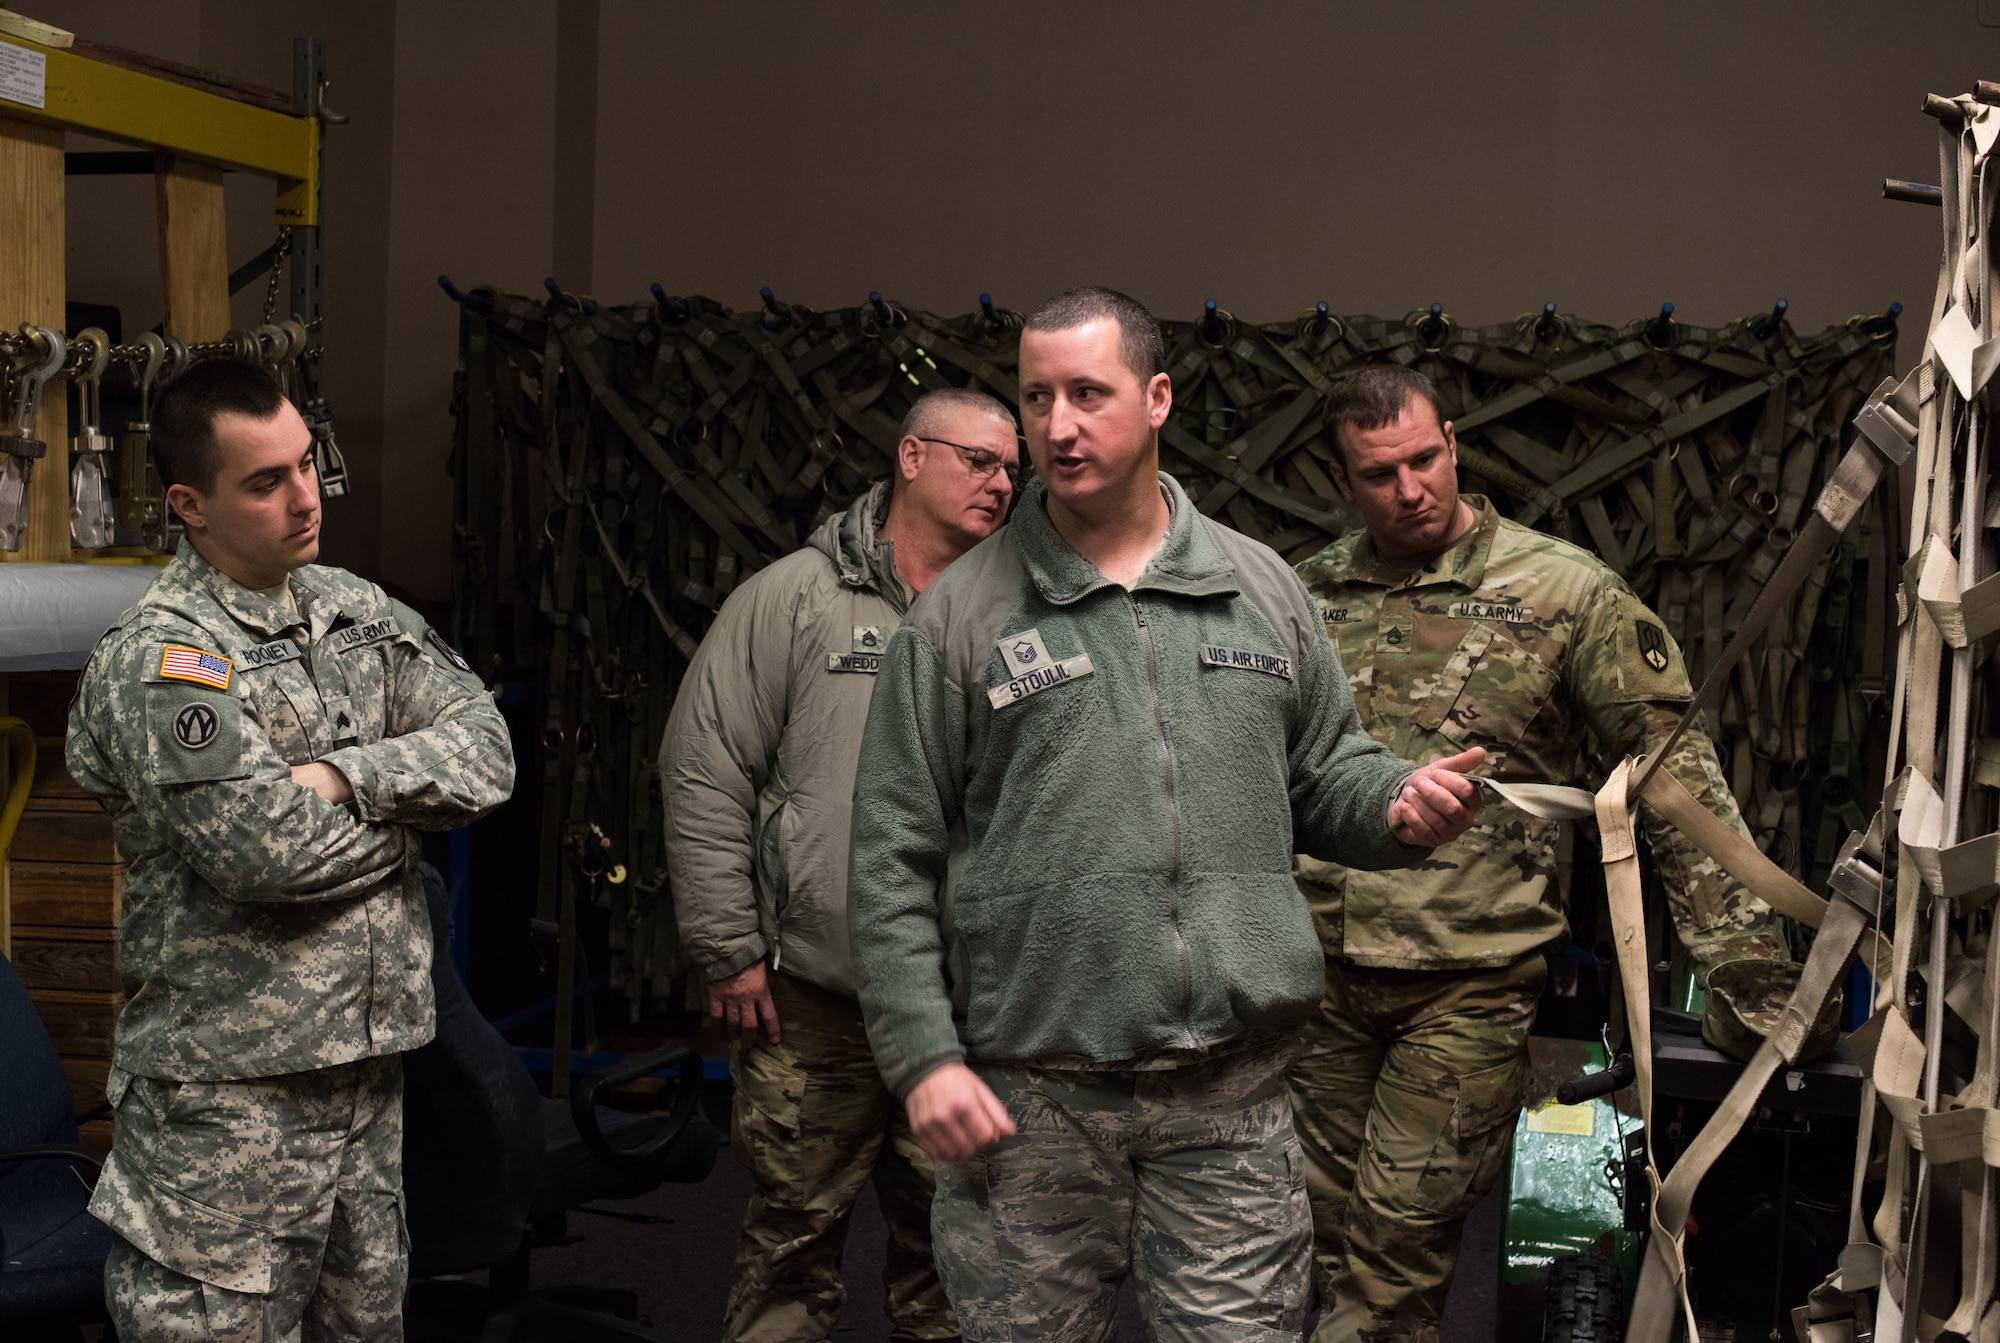 U.S. Air Force Master Sgt. Chad Stoulil, 55th Logistics Readiness Squadron Small Aircraft Terminal superintendent, teaches a cargo preparation course to Soldiers from the U.S. Army Reserve 561 st Regional Support Group at Offutt Air Force Base, Nebraska, Jan. 29, 2018. To prepare for joint operations in deployed environments, the Soldiers learned the details of effective and safe pallet building for air shipments. (U.S. Air Force photo by Senior Airman Jacob Skovo)